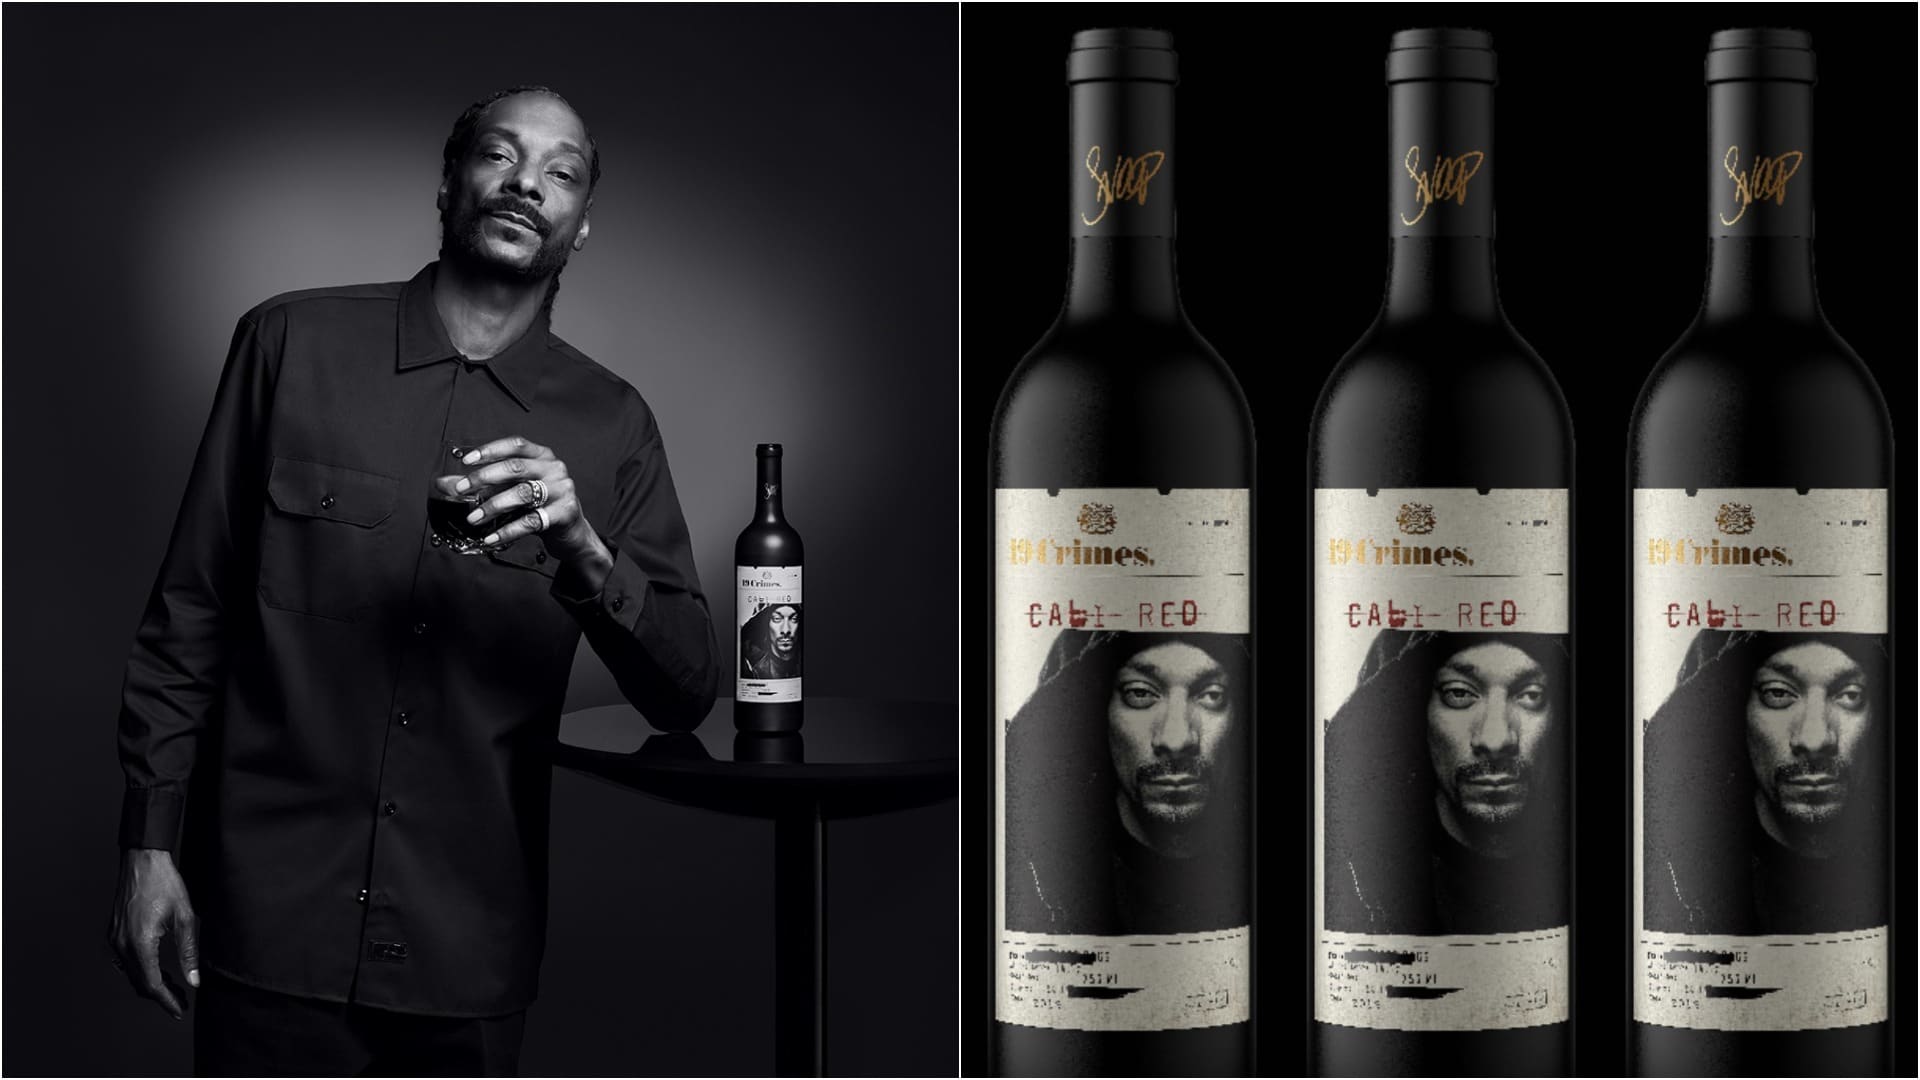 snoop-dogg-19-crimes-red-wine-finally-available-in-australia